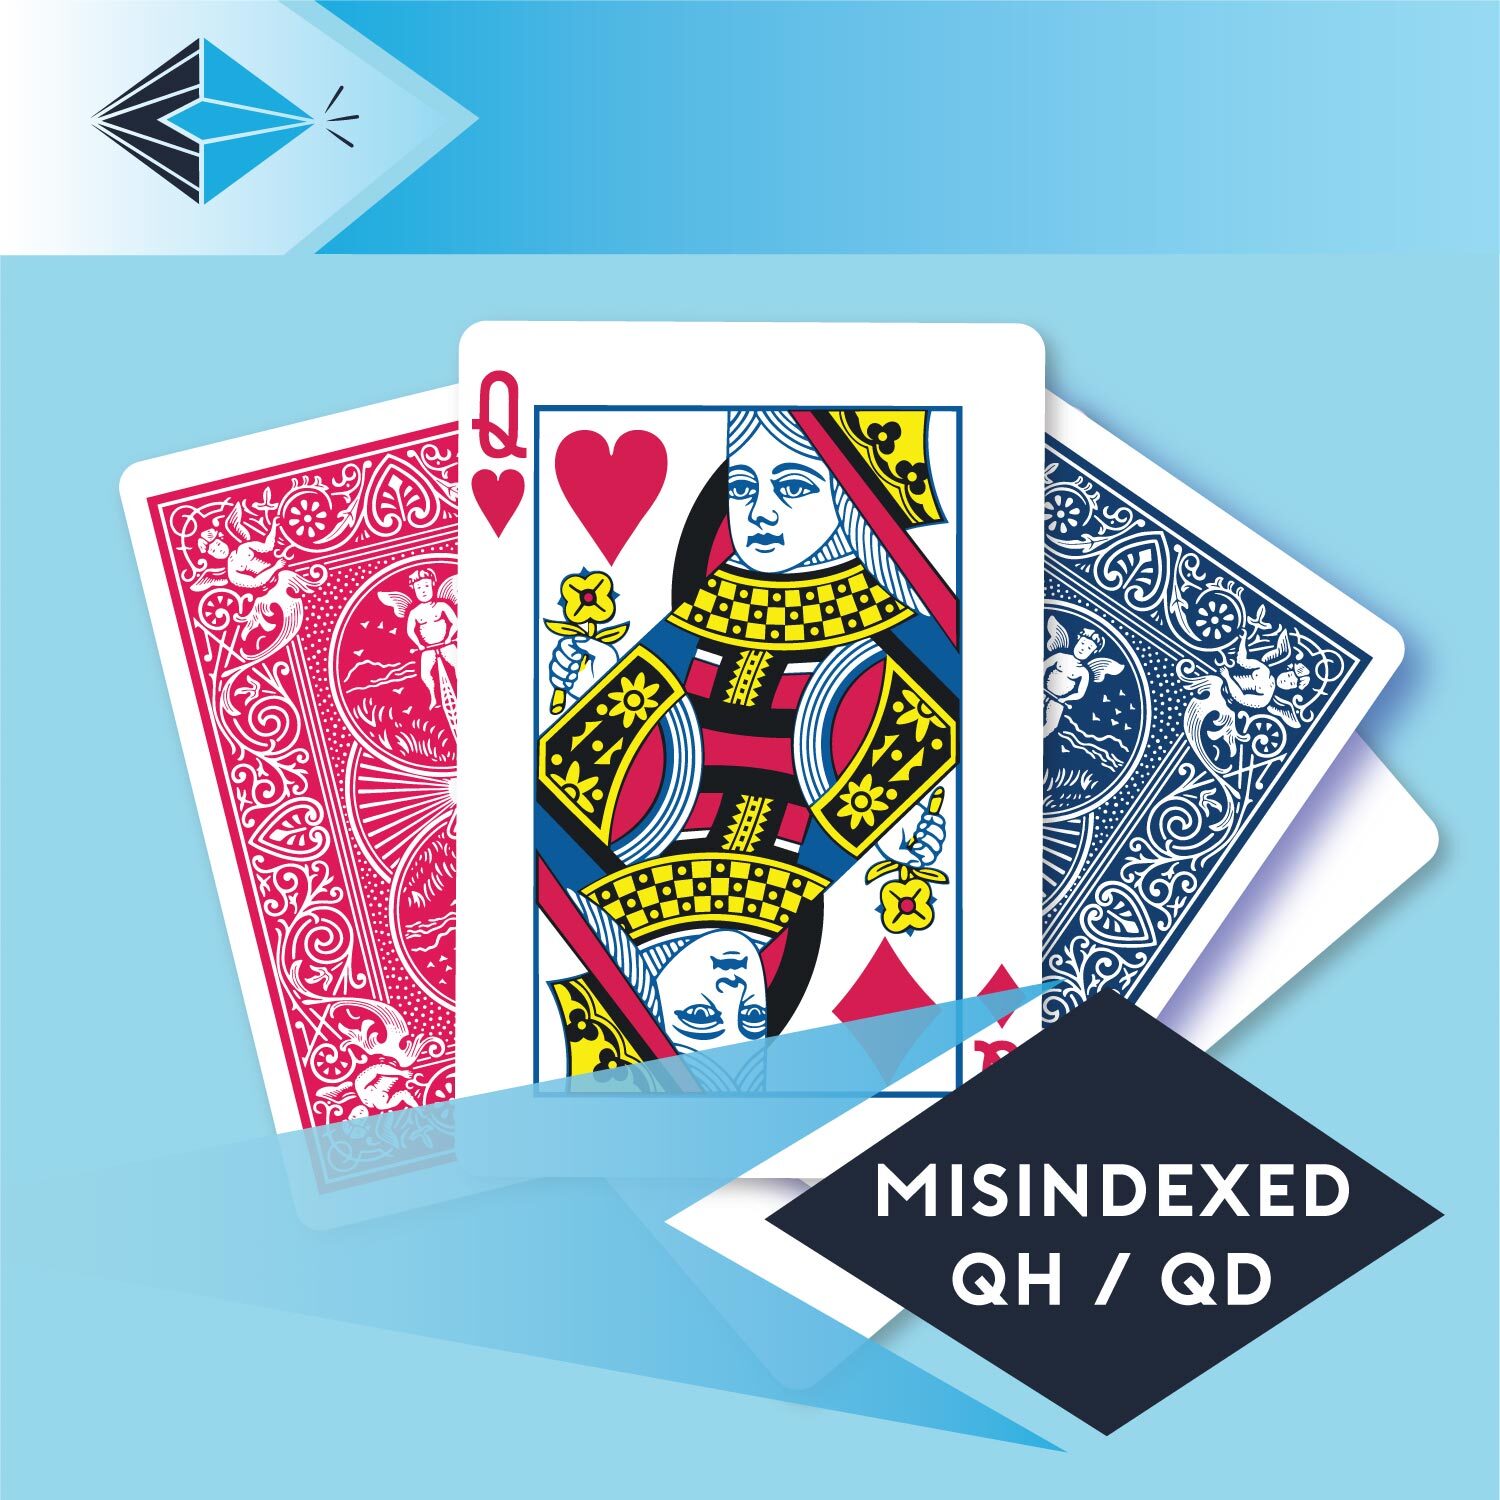 mis-indexed-queen-spades-clubs-qh-qd-playing card for magicians printing printers Stockport Manchester UK